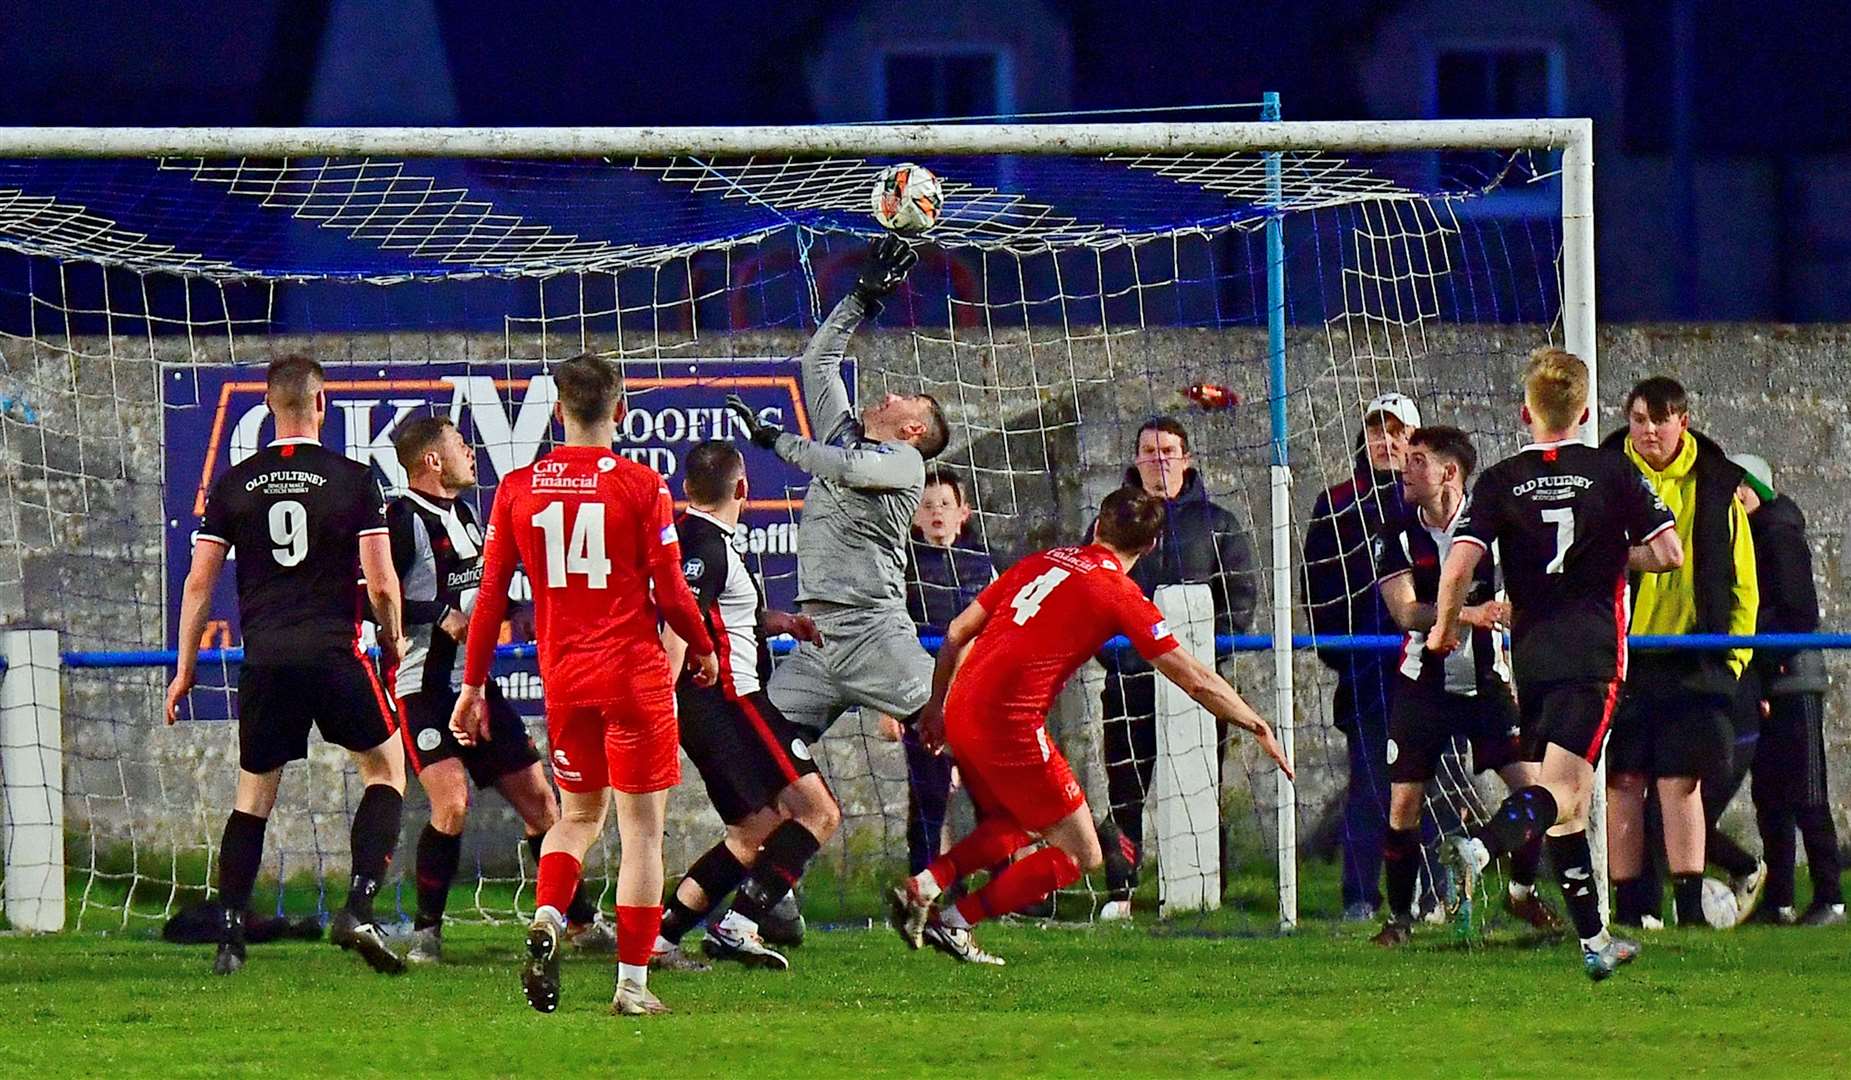 Colin Williamson's header flies past Wick keeper Graeme Williamson for the only goal in the midweek clash at Golspie. Picture: Mel Roger